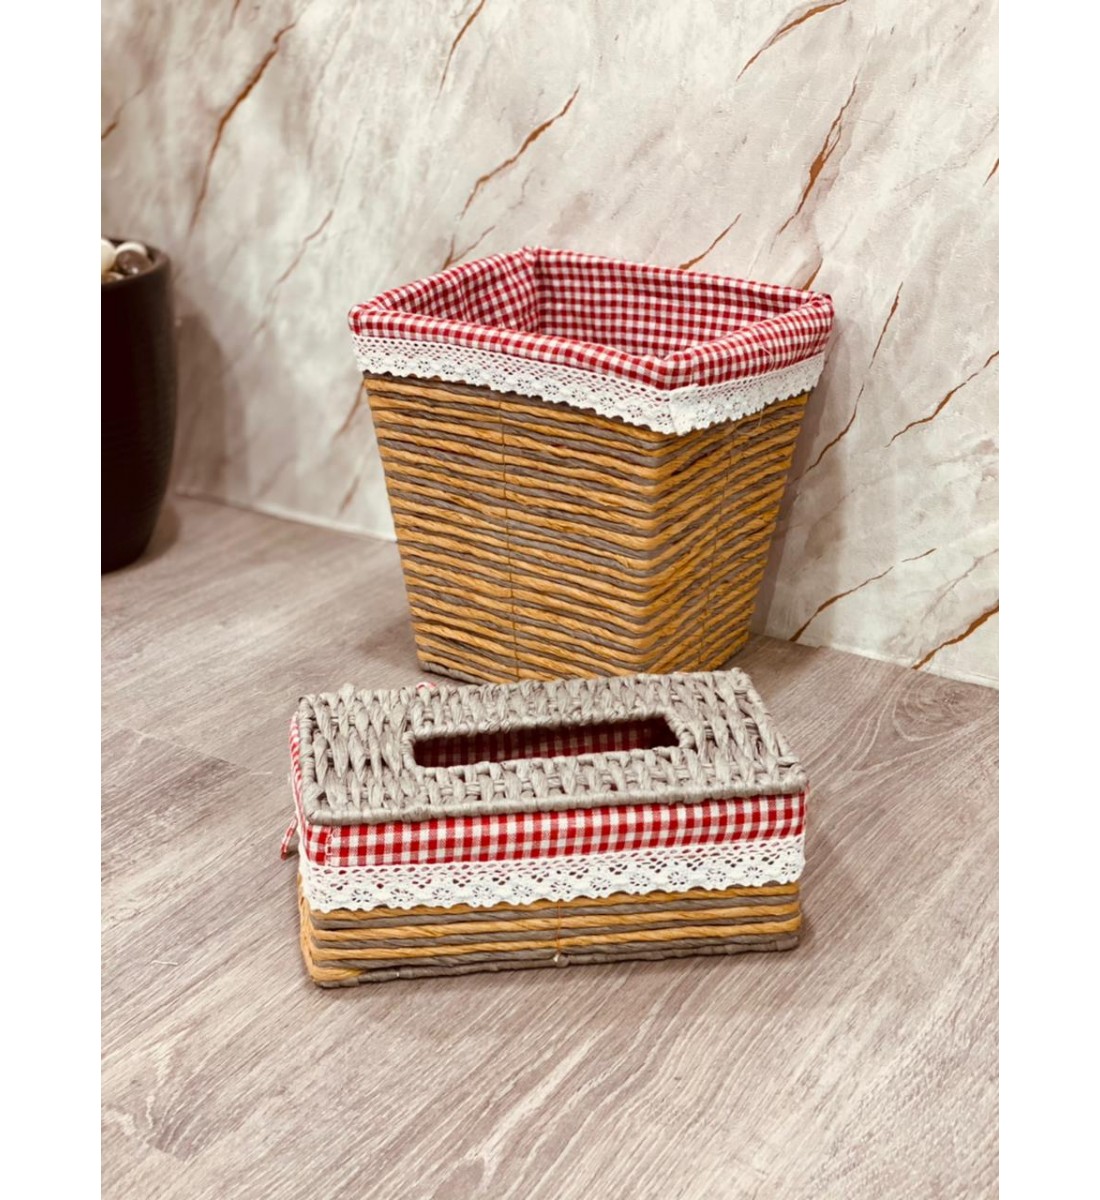 A wastebasket and a stylish and modern tissue box